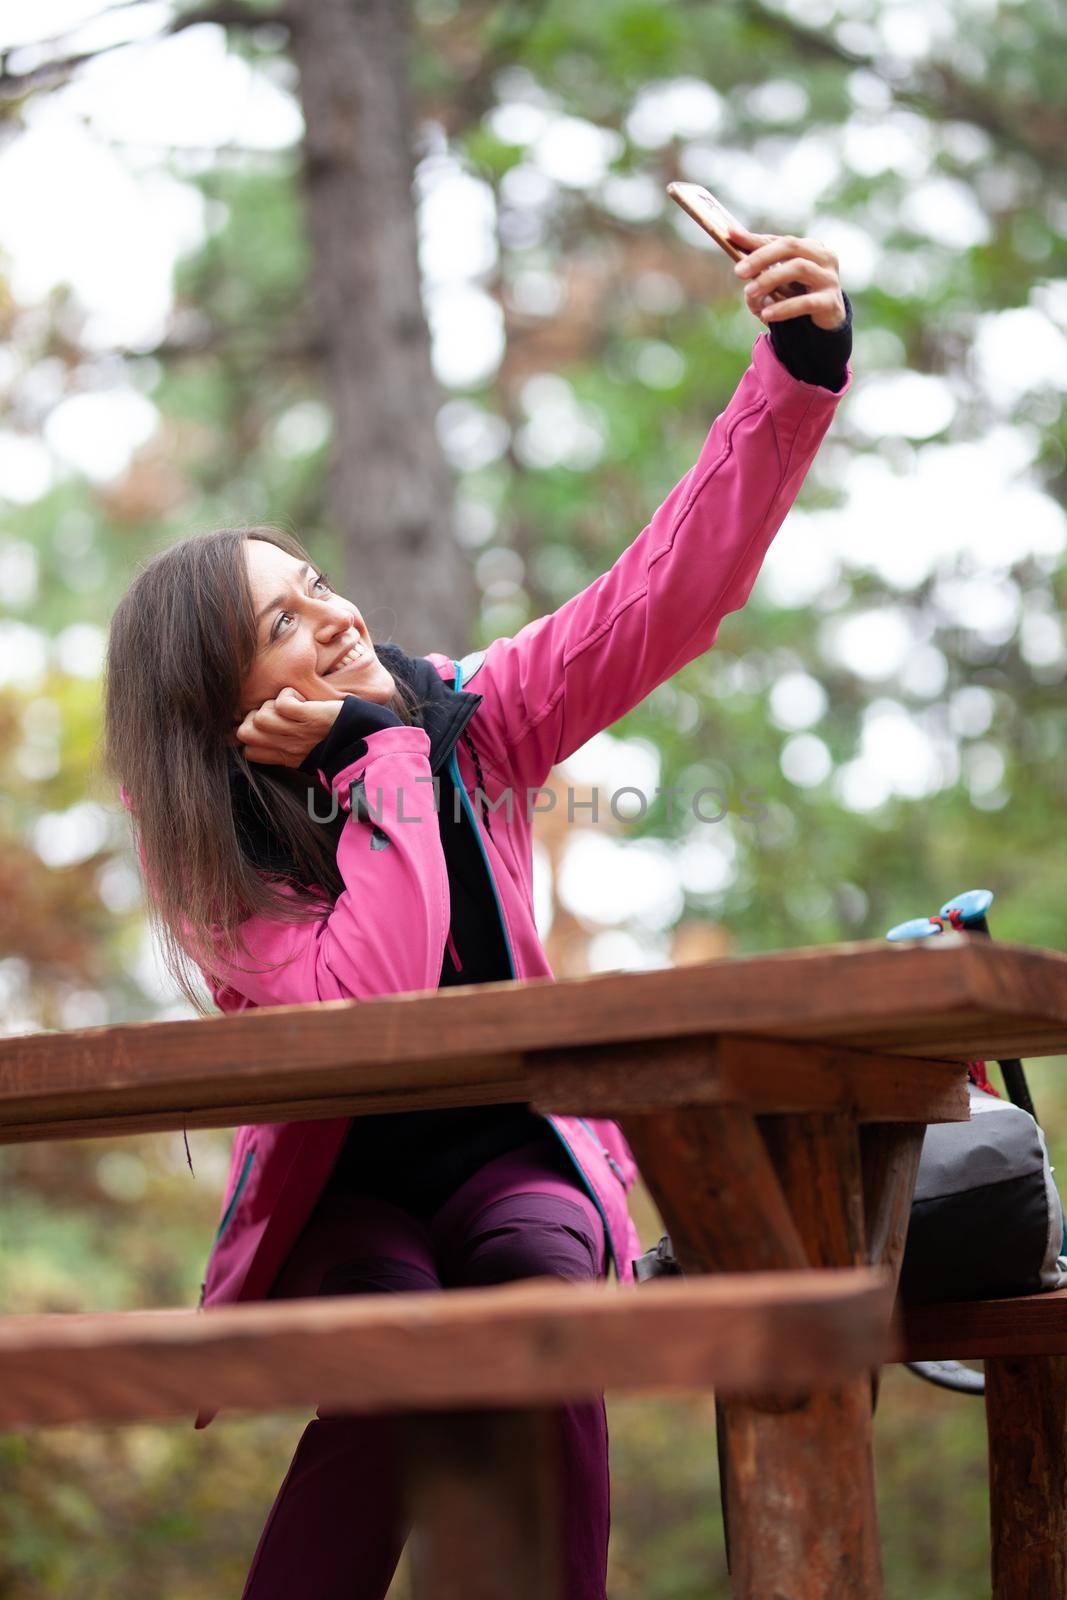 Hiker girl resting on a bench in the forest. Backpacker with pink jacket taking selfie with smartphone. by kokimk